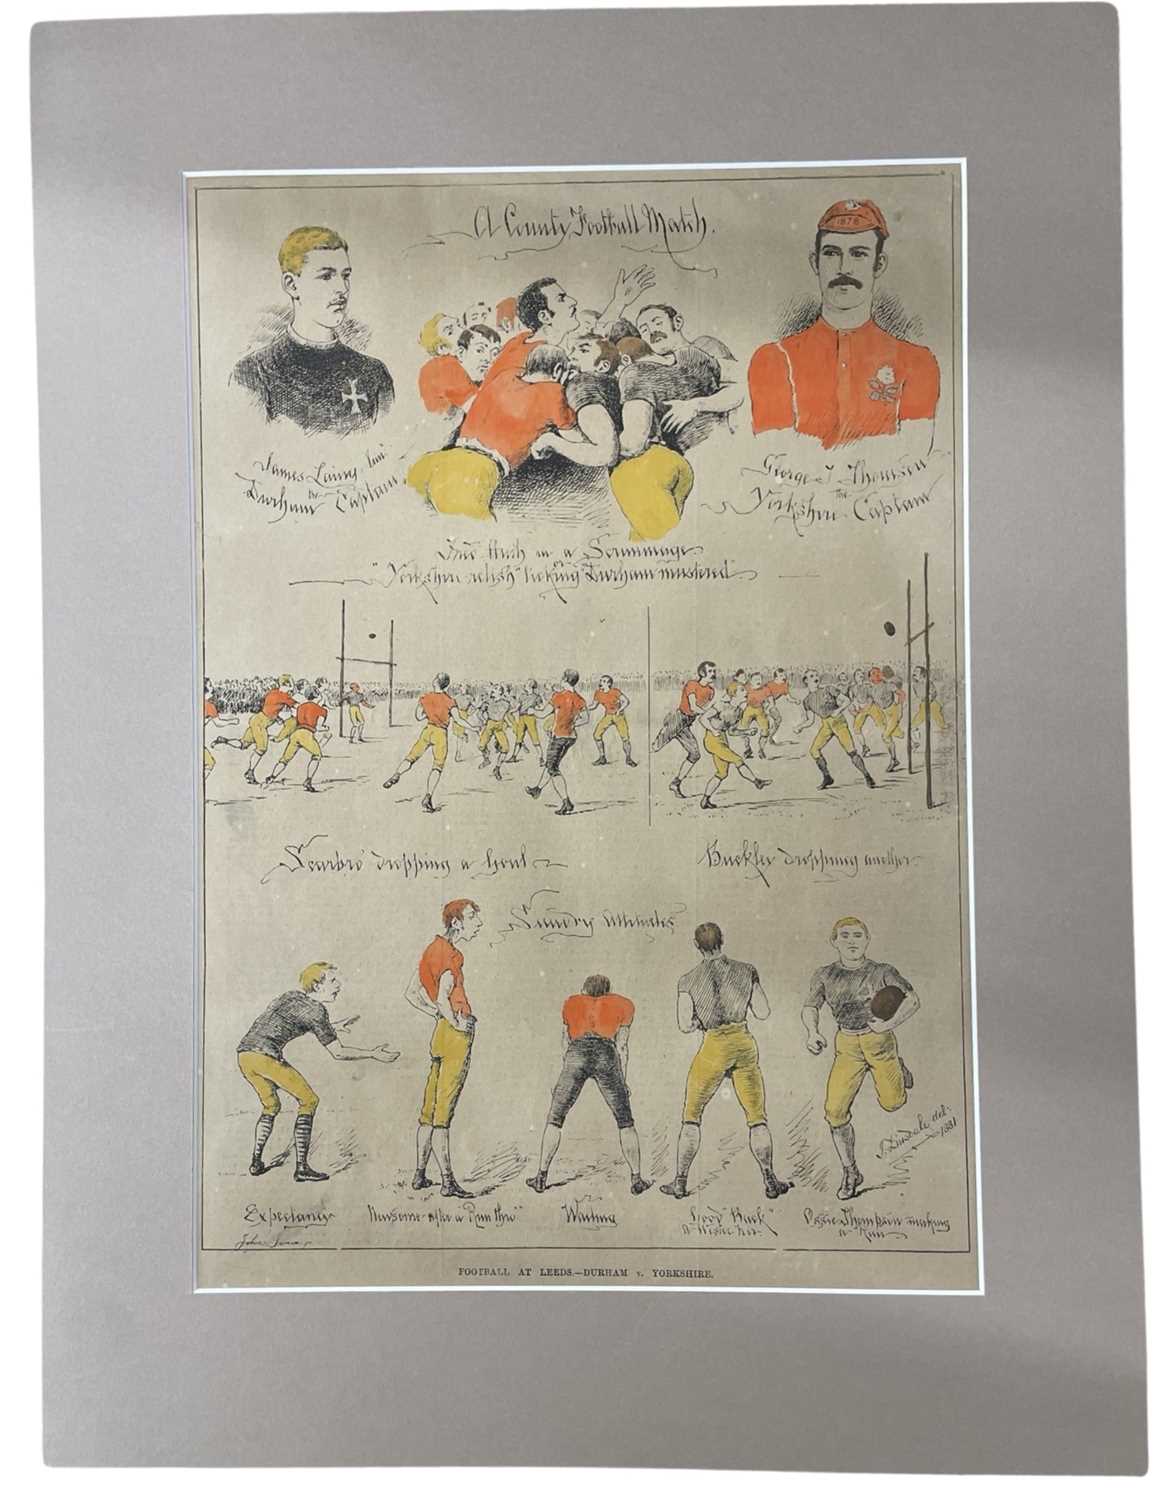 A vintage print overcoloured with watercolour, depicting 'A County Football Match - Football at